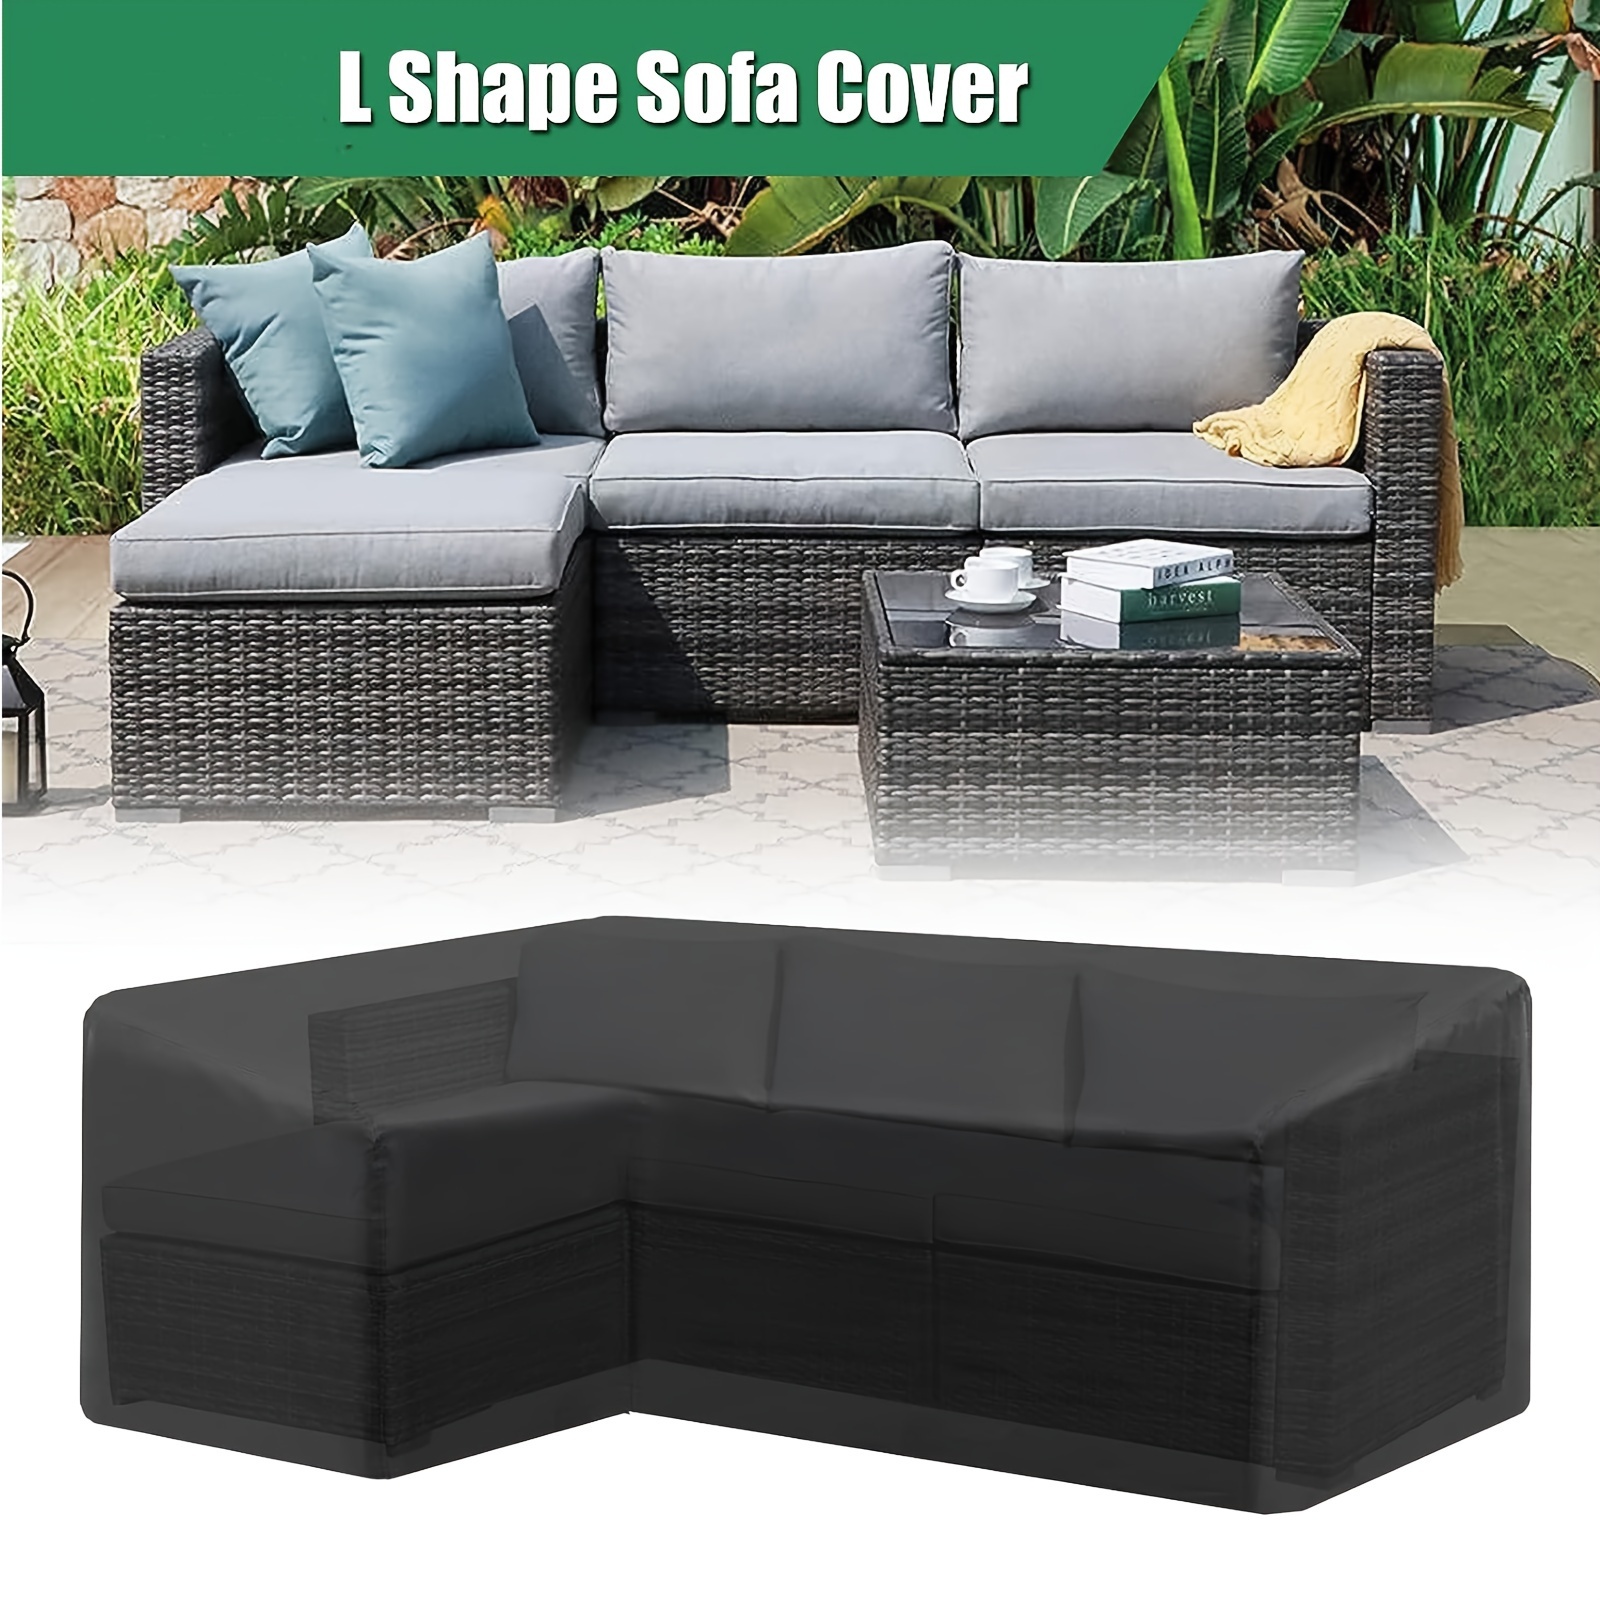 

Waterproof L-shaped Patio Furniture Cover For Deck, Lawn And Backyard - Polyester, Tied Closure, Suitable For Outdoor Sectional Sofa